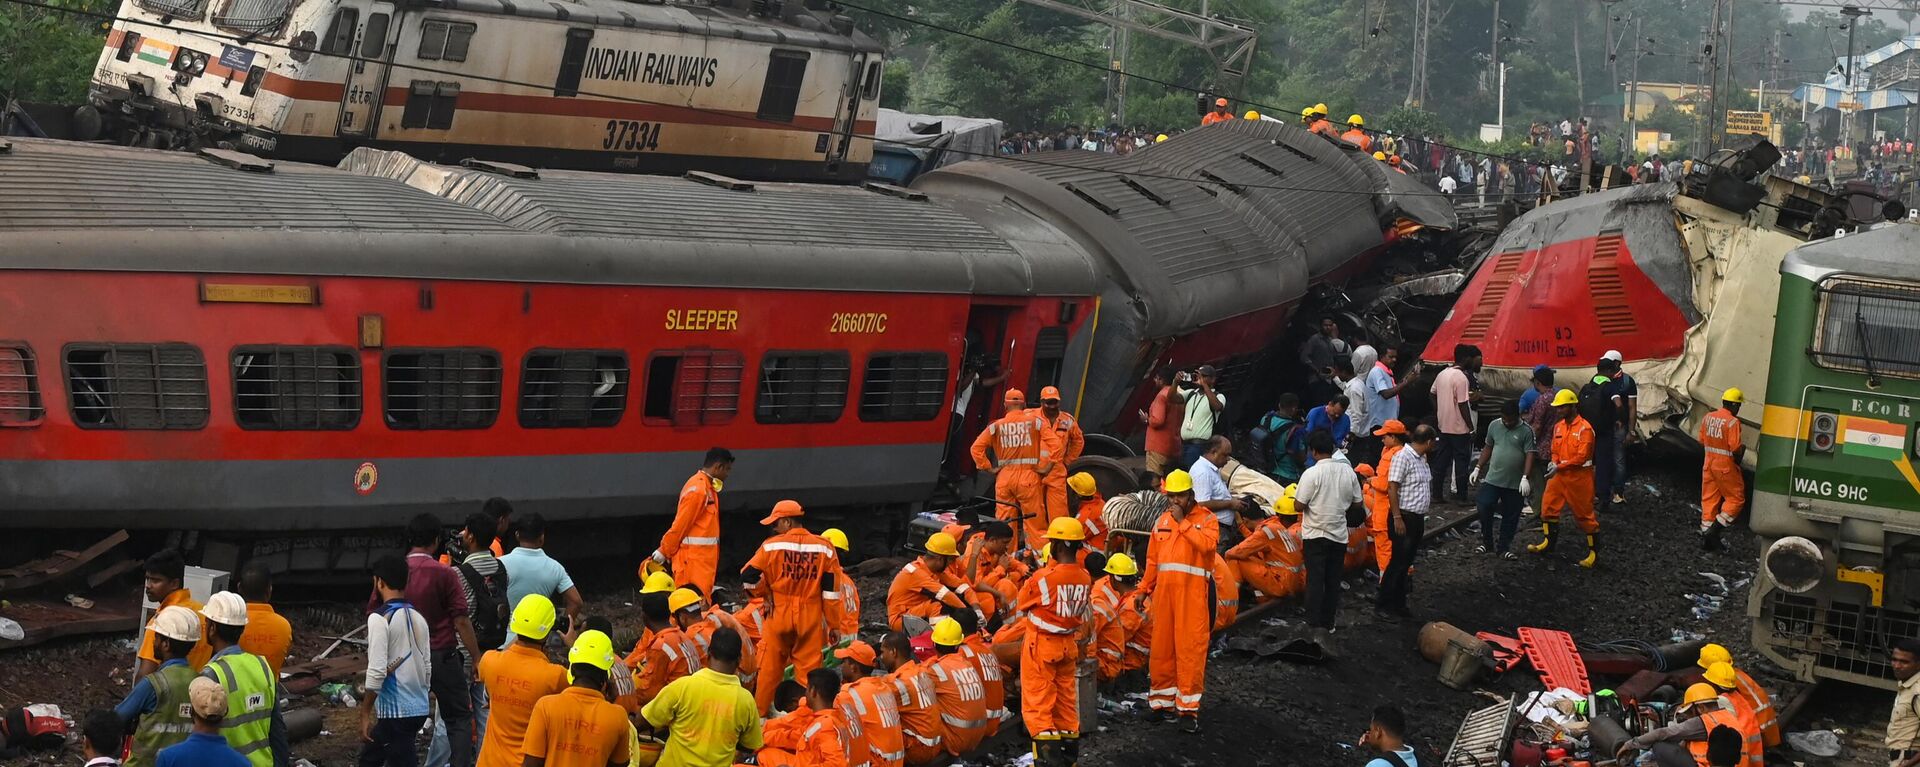 Rescue workers gather around damaged carriages at the accident site of a three-train collision near Balasore, about 200 km (125 miles) from the state capital Bhubaneswar in the eastern state of Odisha, on June 3, 2023. At least 288 people were killed and more than 850 injured in a horrific three-train collision in India, officials said on June 3, the country's deadliest rail accident in more than 20 years. (Photo by Dibyangshu SARKAR / AFP) - Sputnik Africa, 1920, 03.06.2023